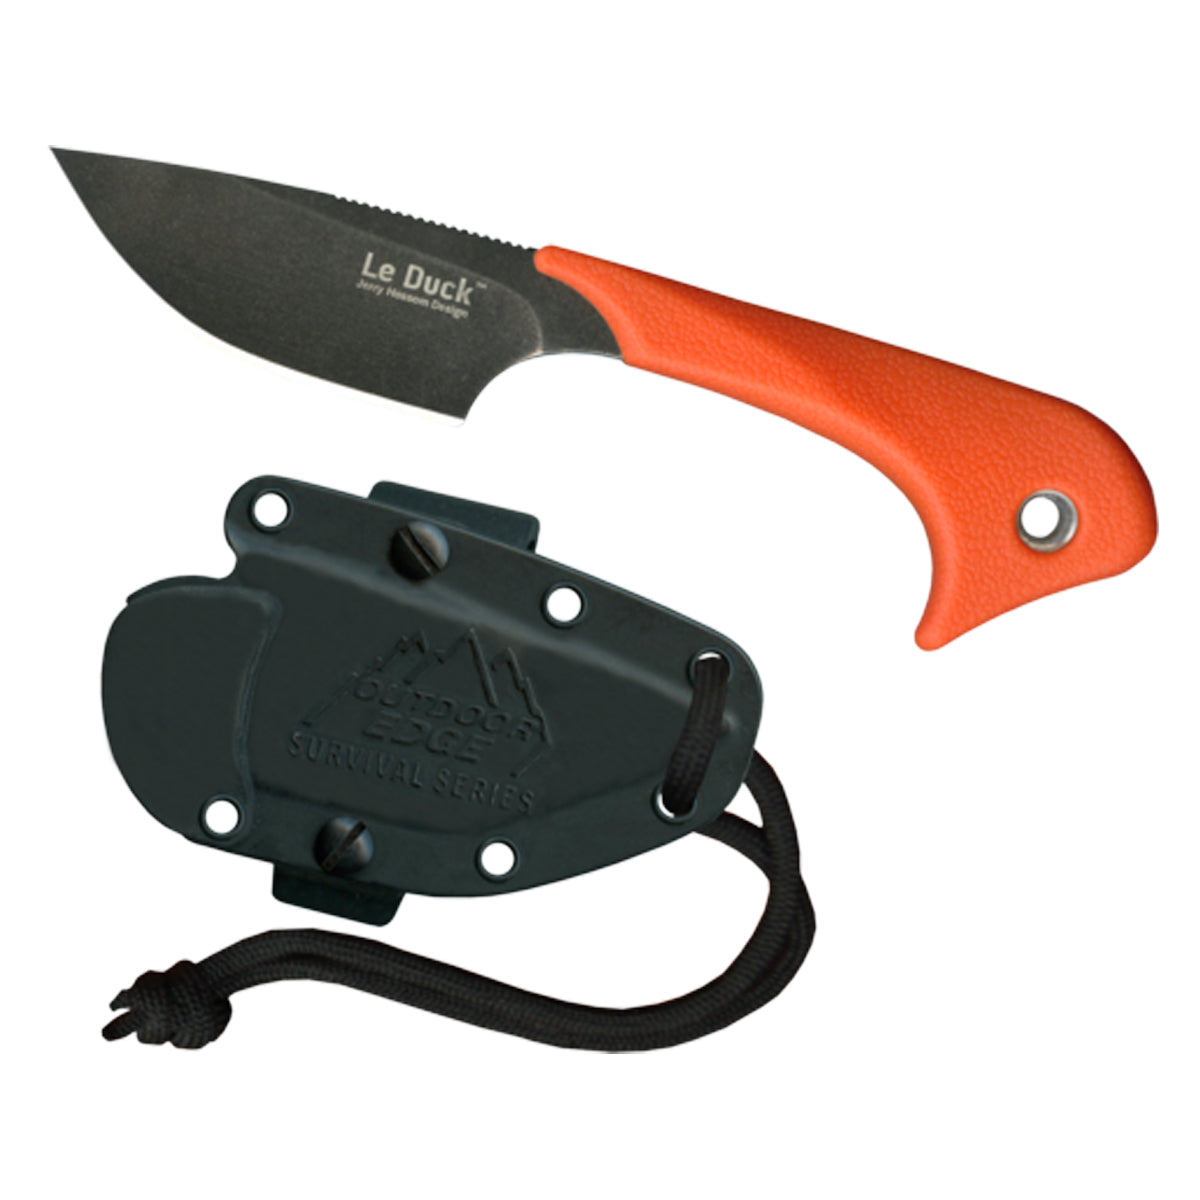 Outdoor Edge Le Duck Fixed Blade Knife in Outdoor Edge Le Duck Fixed Blade Knife by Outdoor Edge | Gear - goHUNT Shop by GOHUNT | Outdoor Edge - GOHUNT Shop